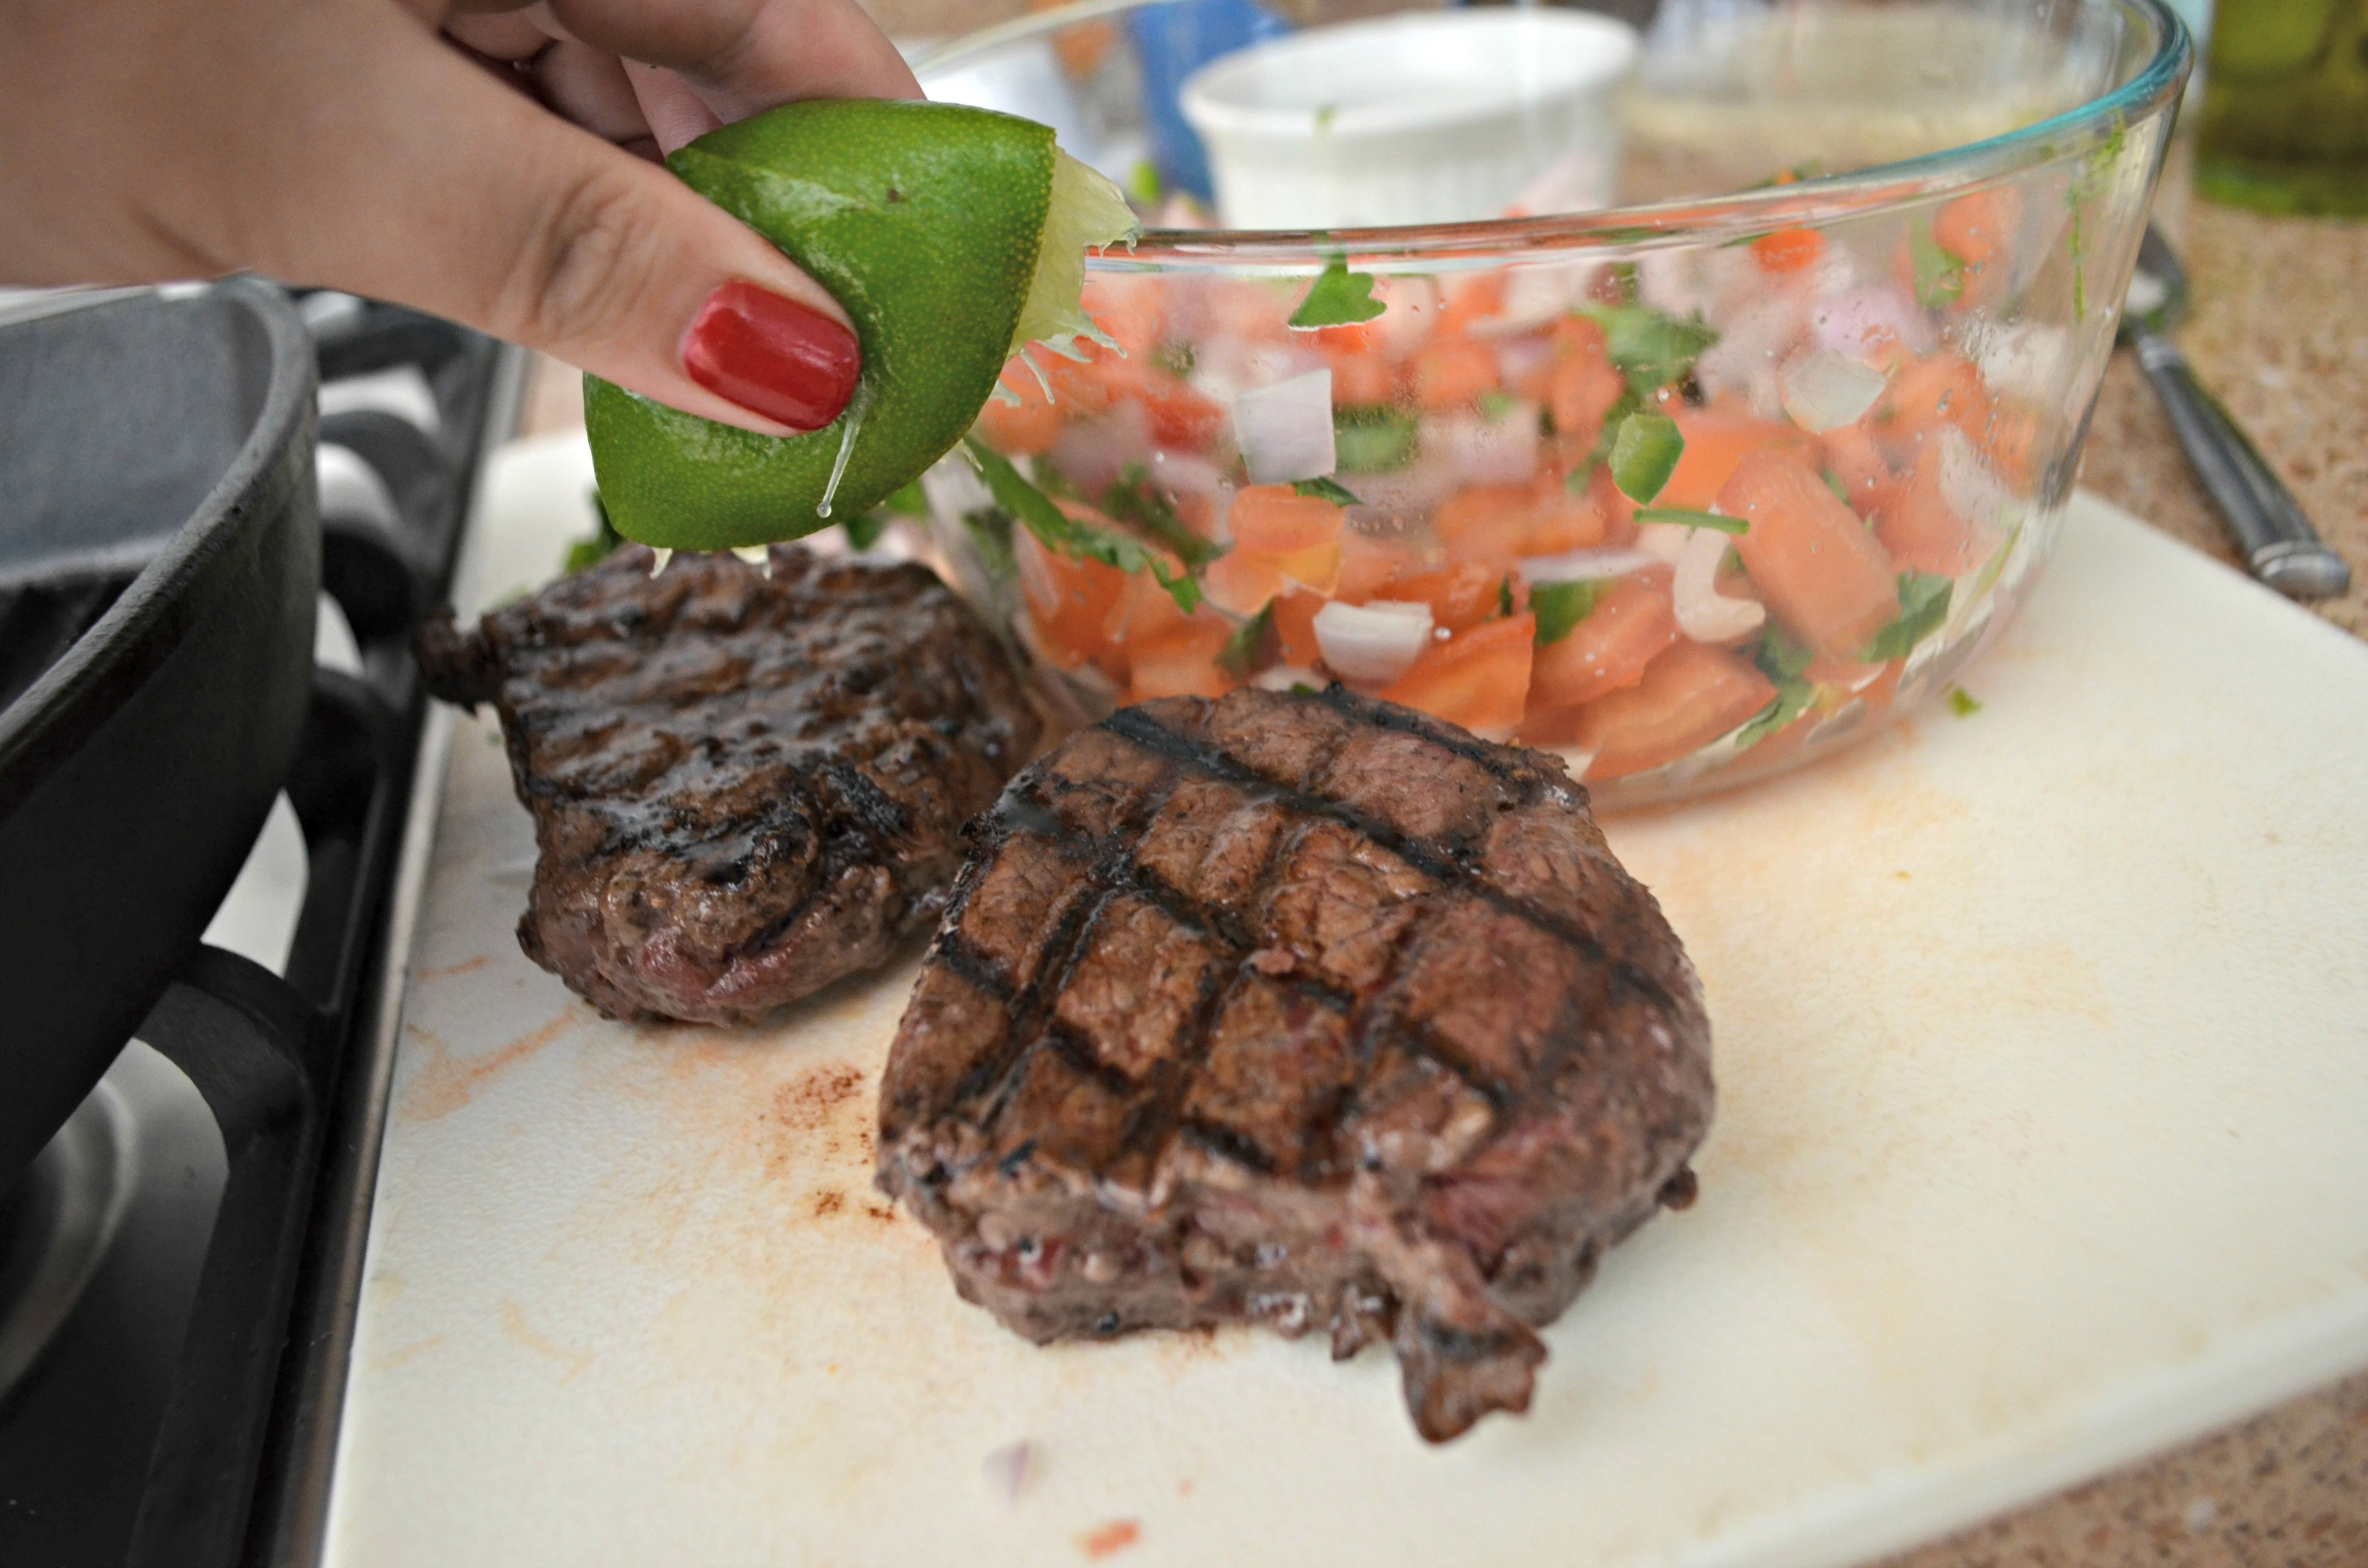 home chef deal | lime squeezed over steak